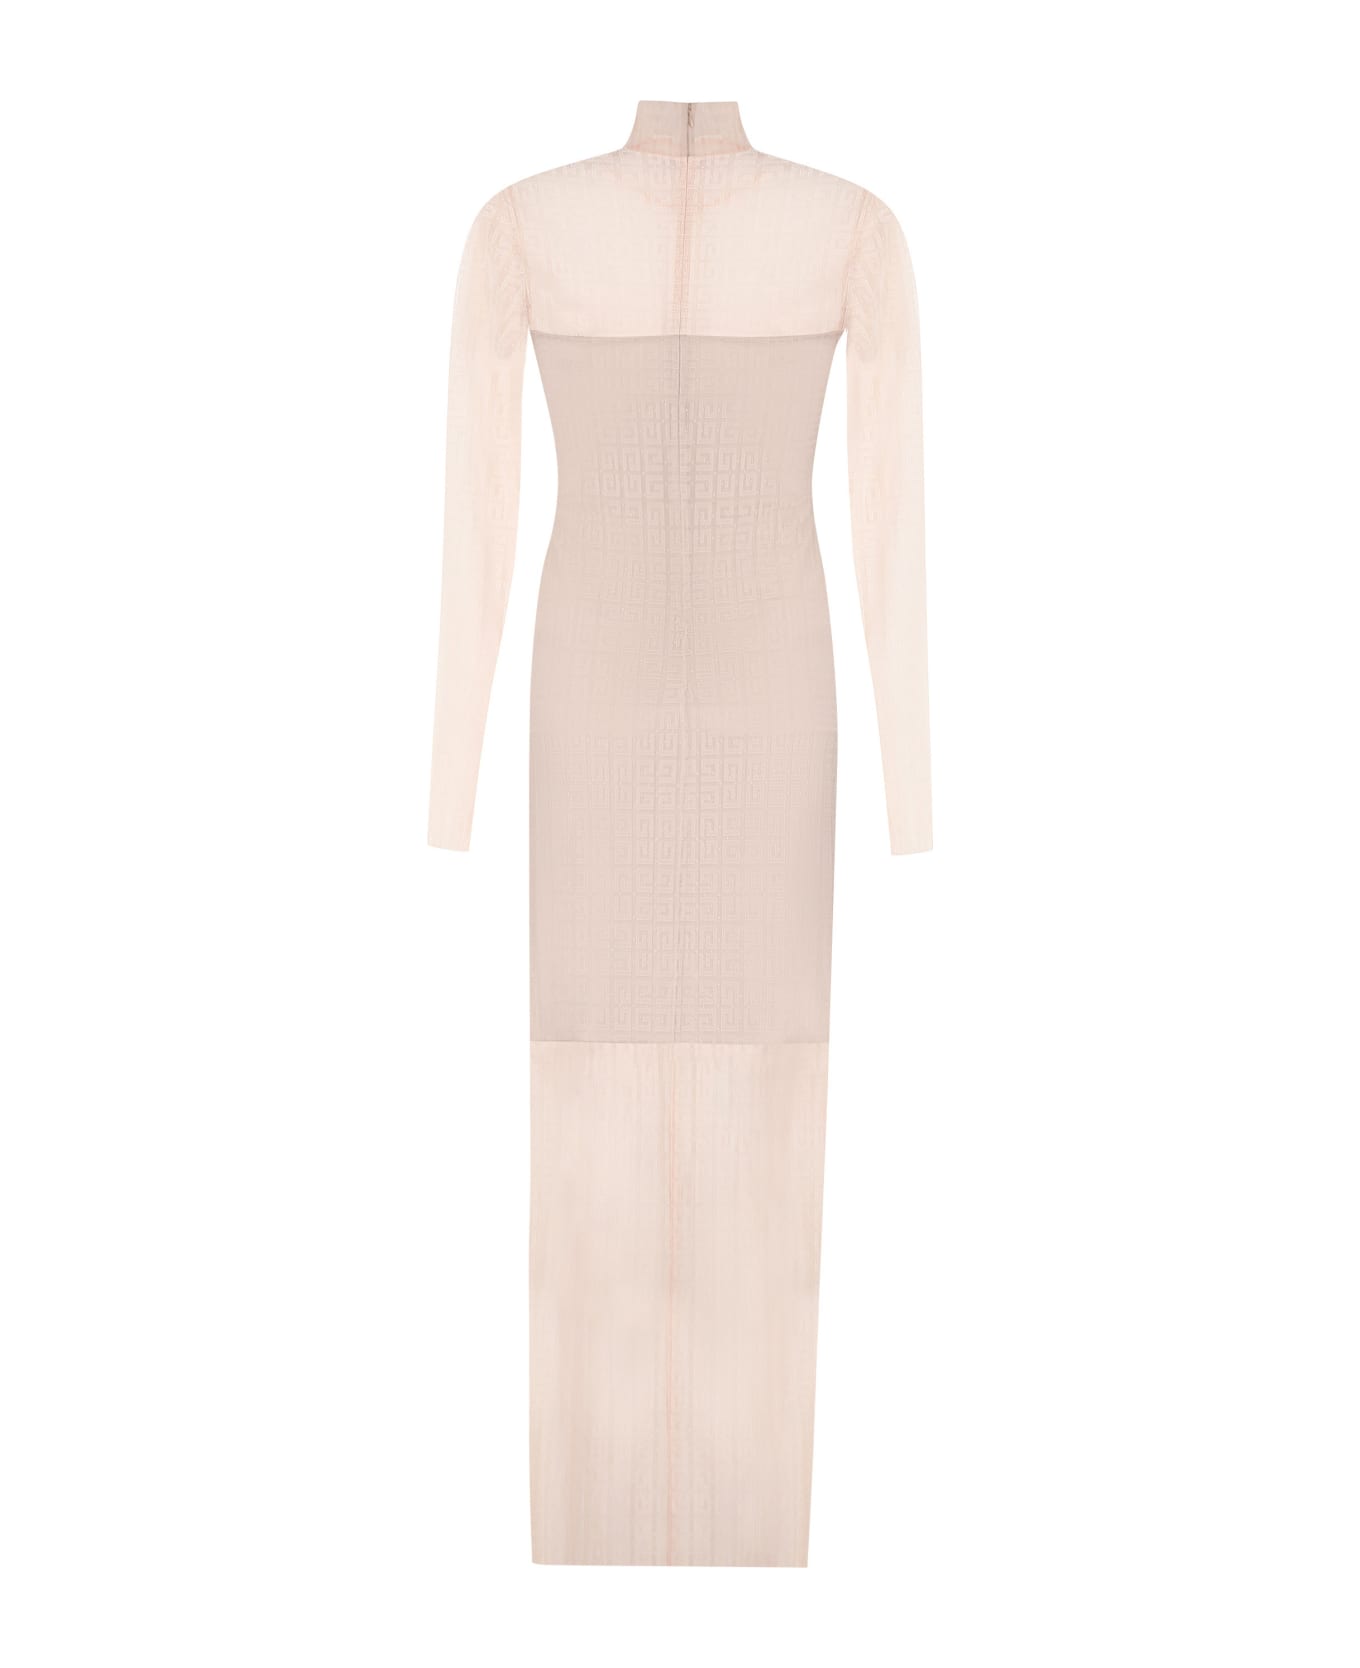 Givenchy Lace Dress - Pink